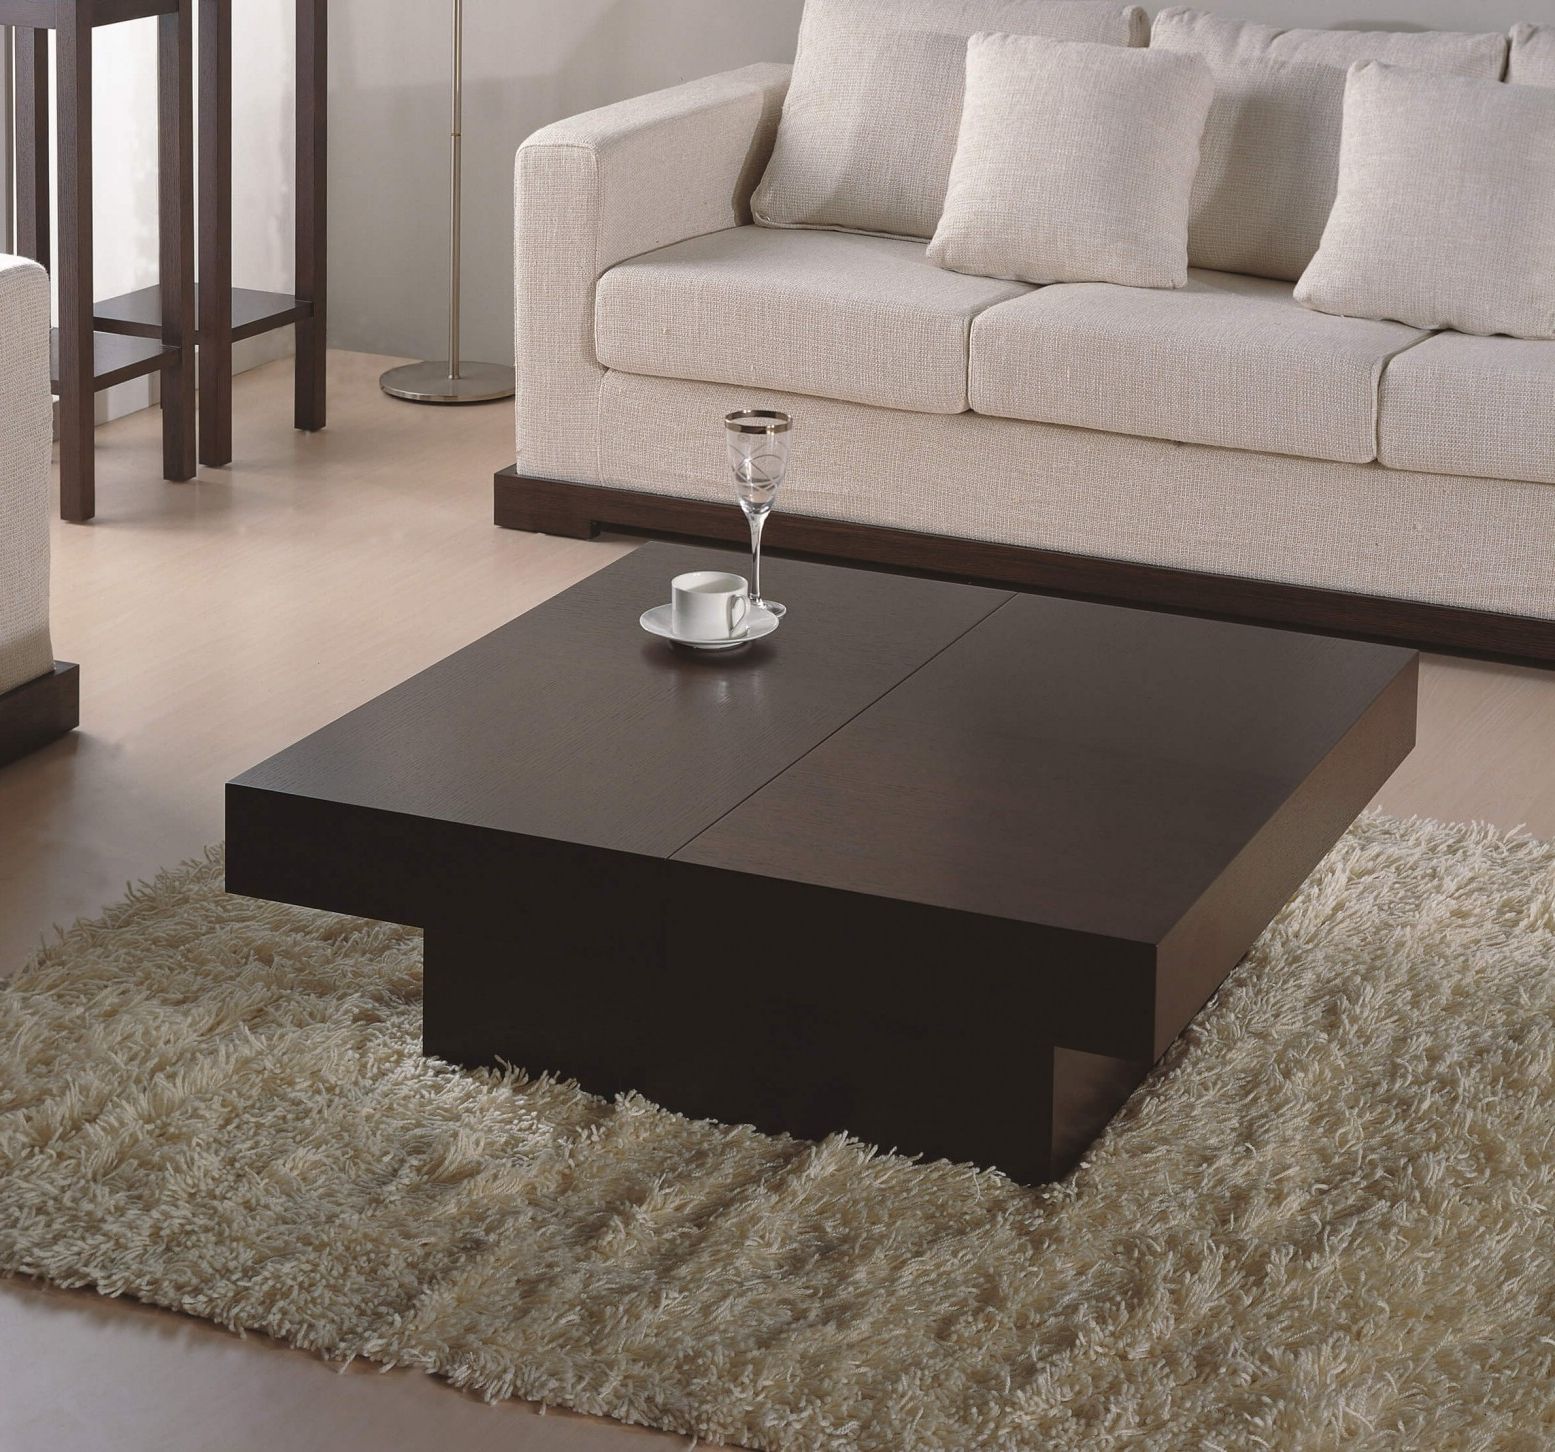 Square Coffee Tables Pertaining To Popular Nile Square Oak Veneer Storage Coffee Table, Wenge (View 8 of 20)